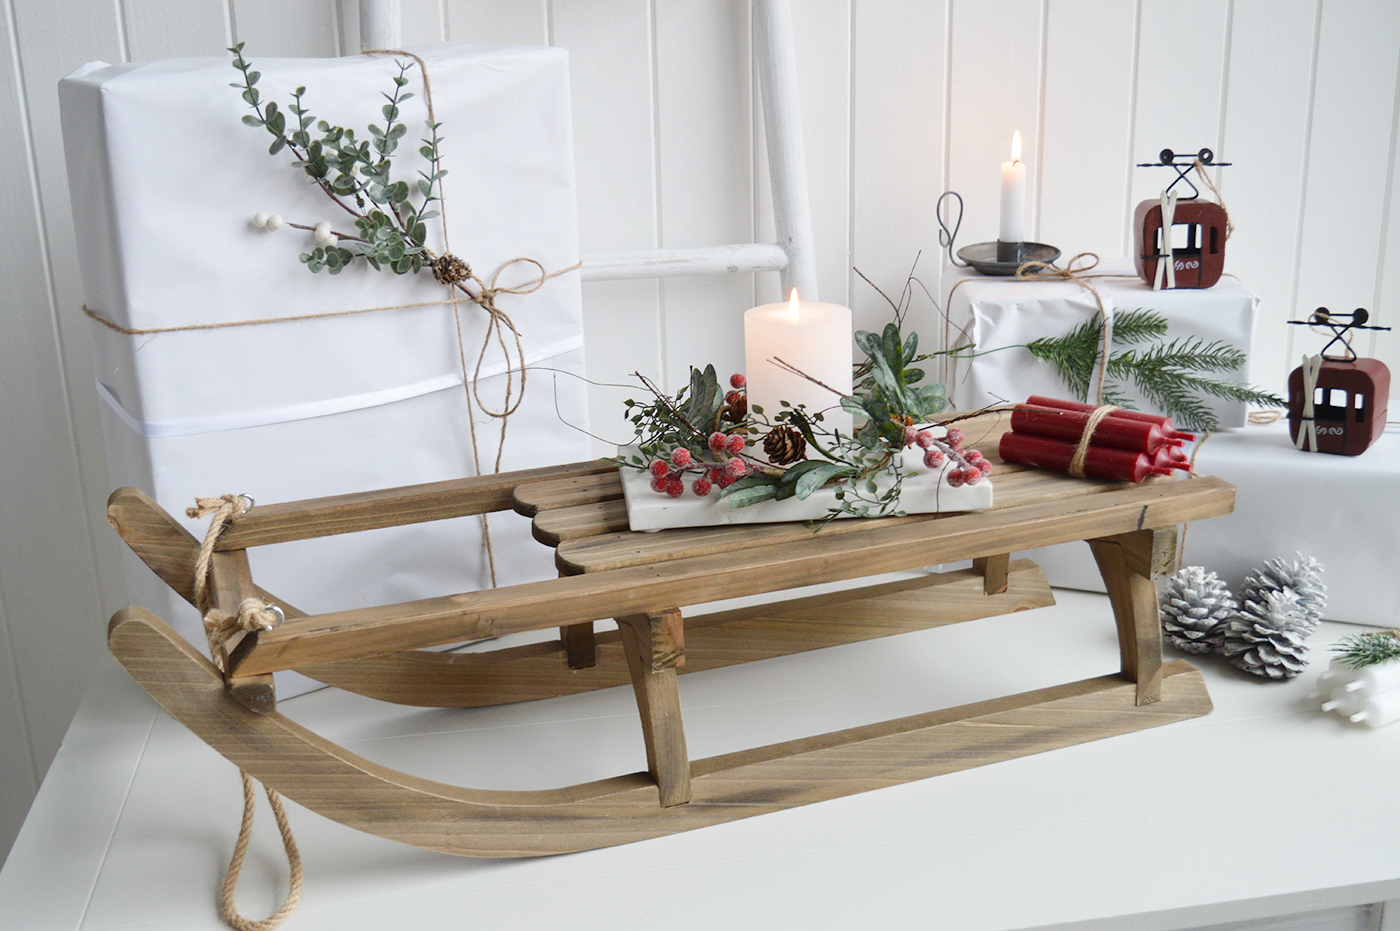 Vintage wooden sleigh - a decorative piece for timeless Christmas decorations